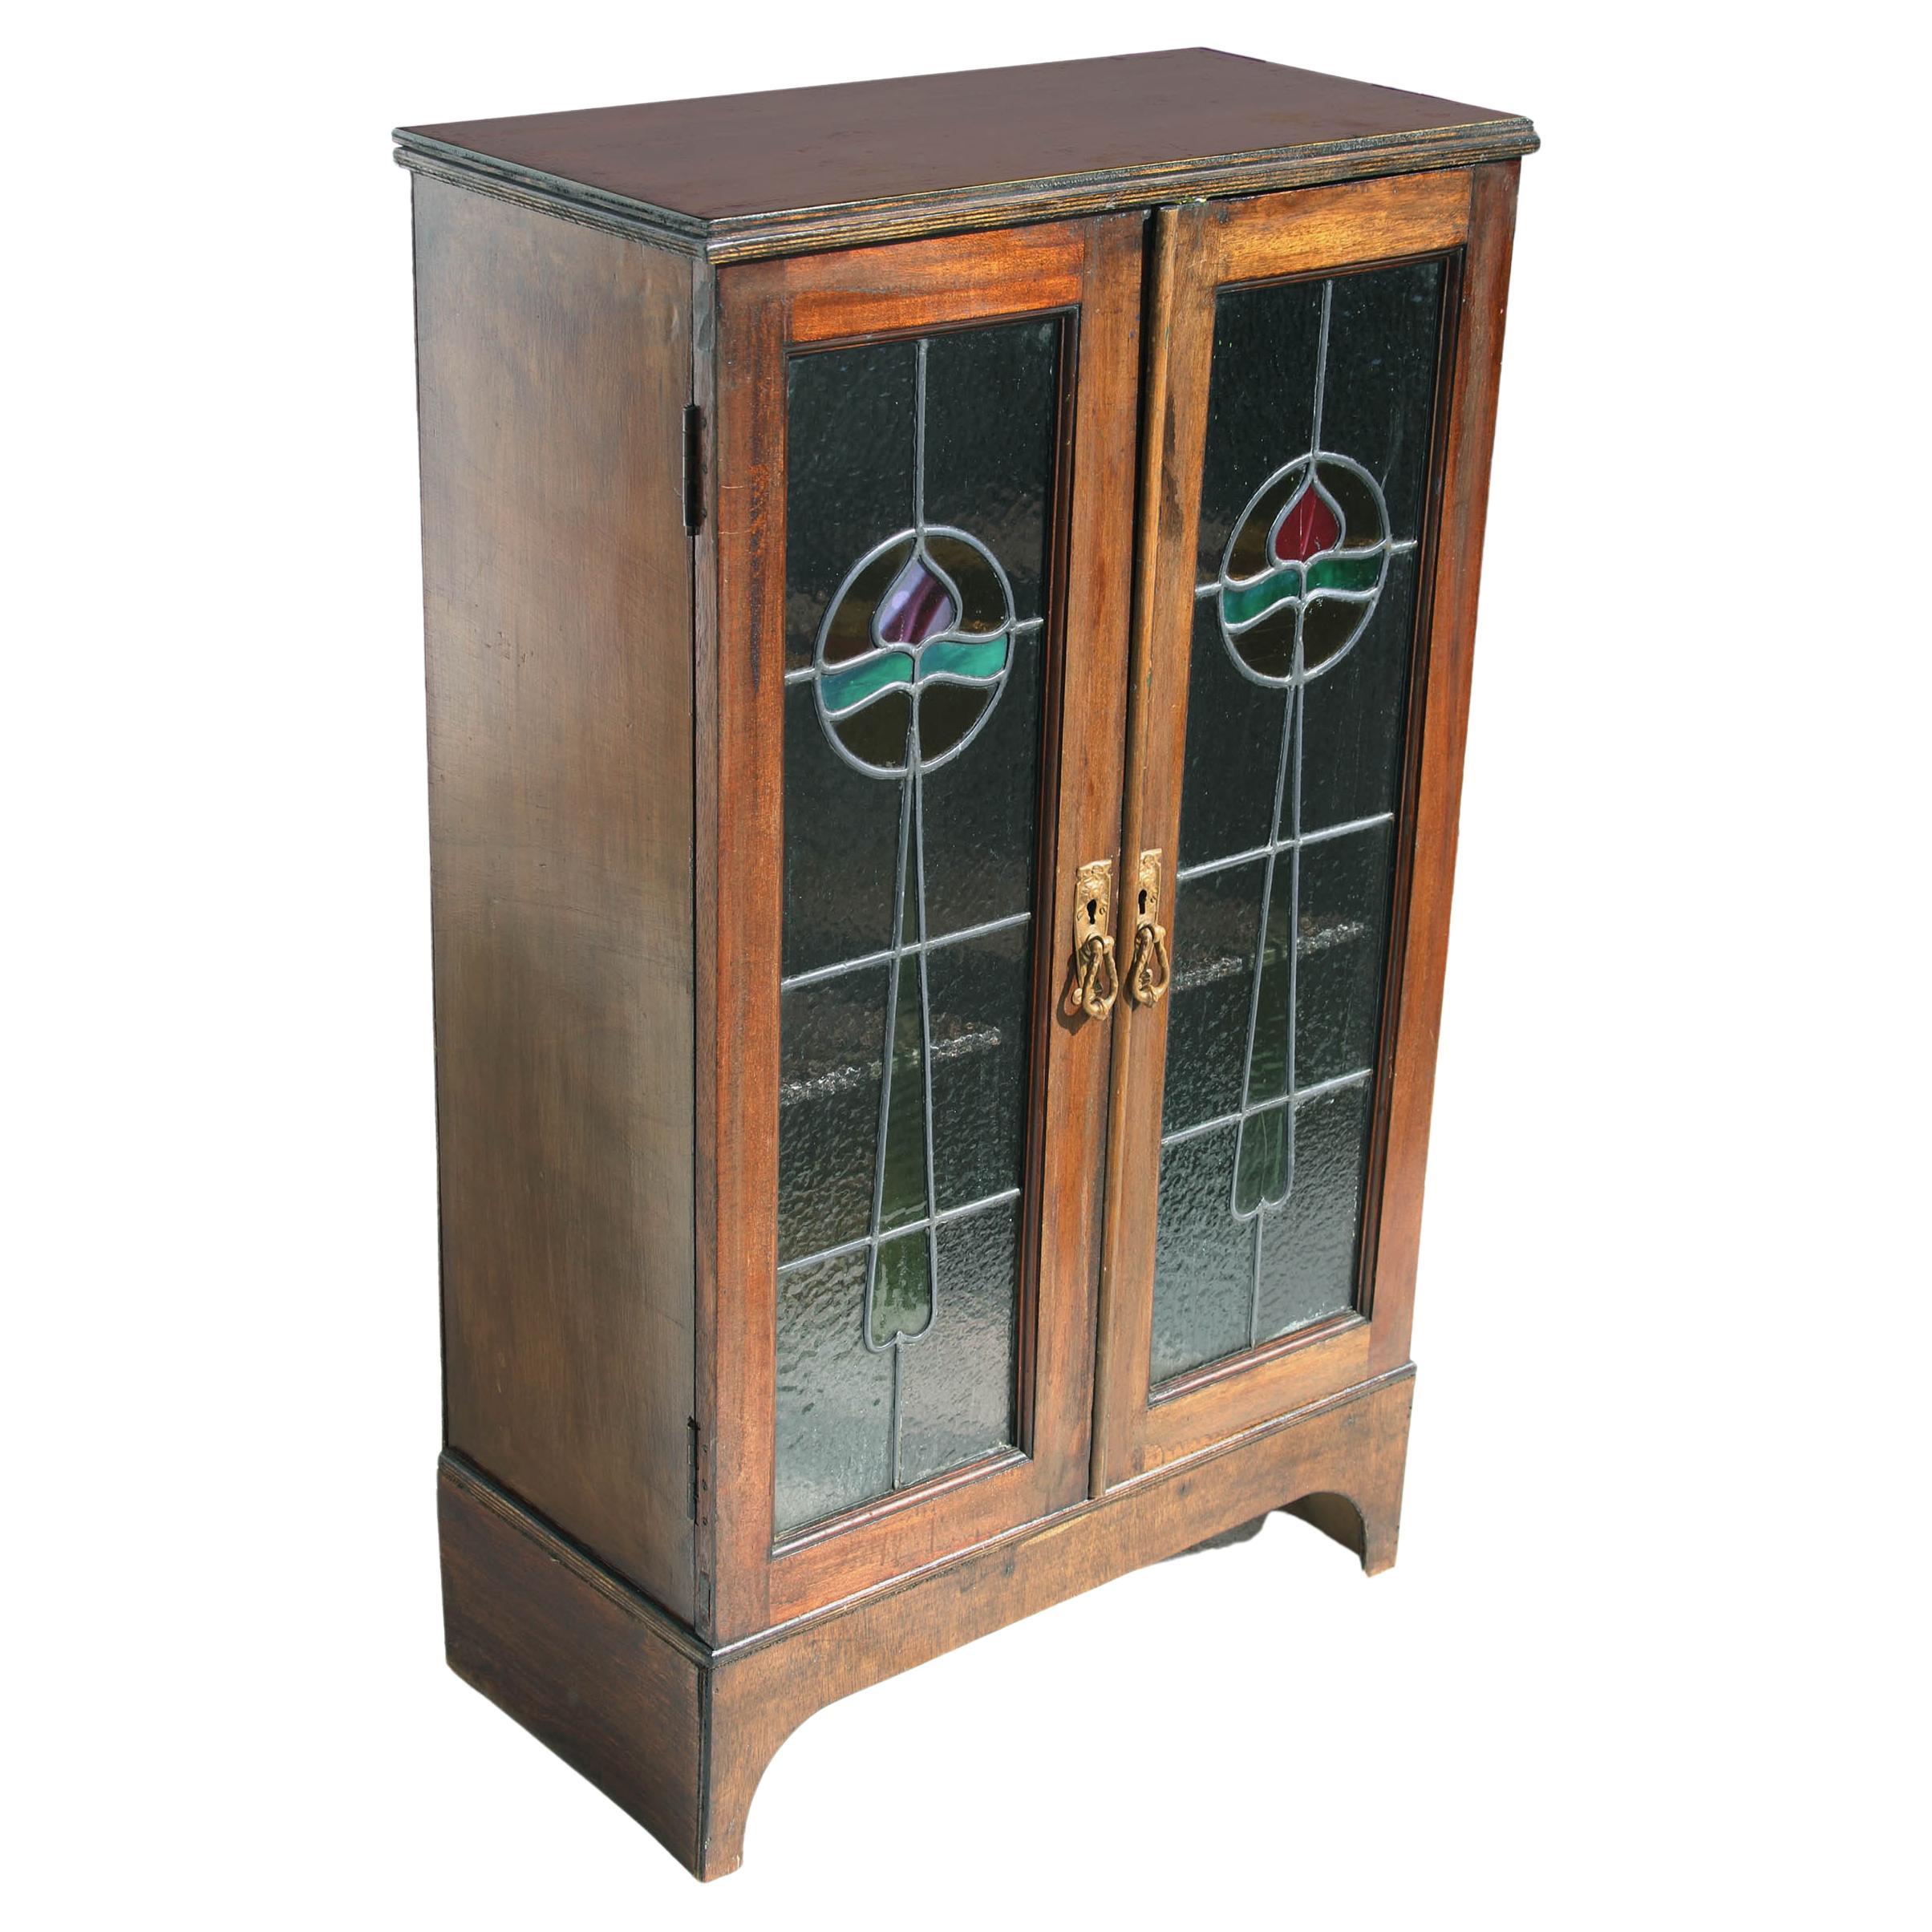 Fine and Rare English Aesthetic Movement Cabinet For Sale at 1stdibs